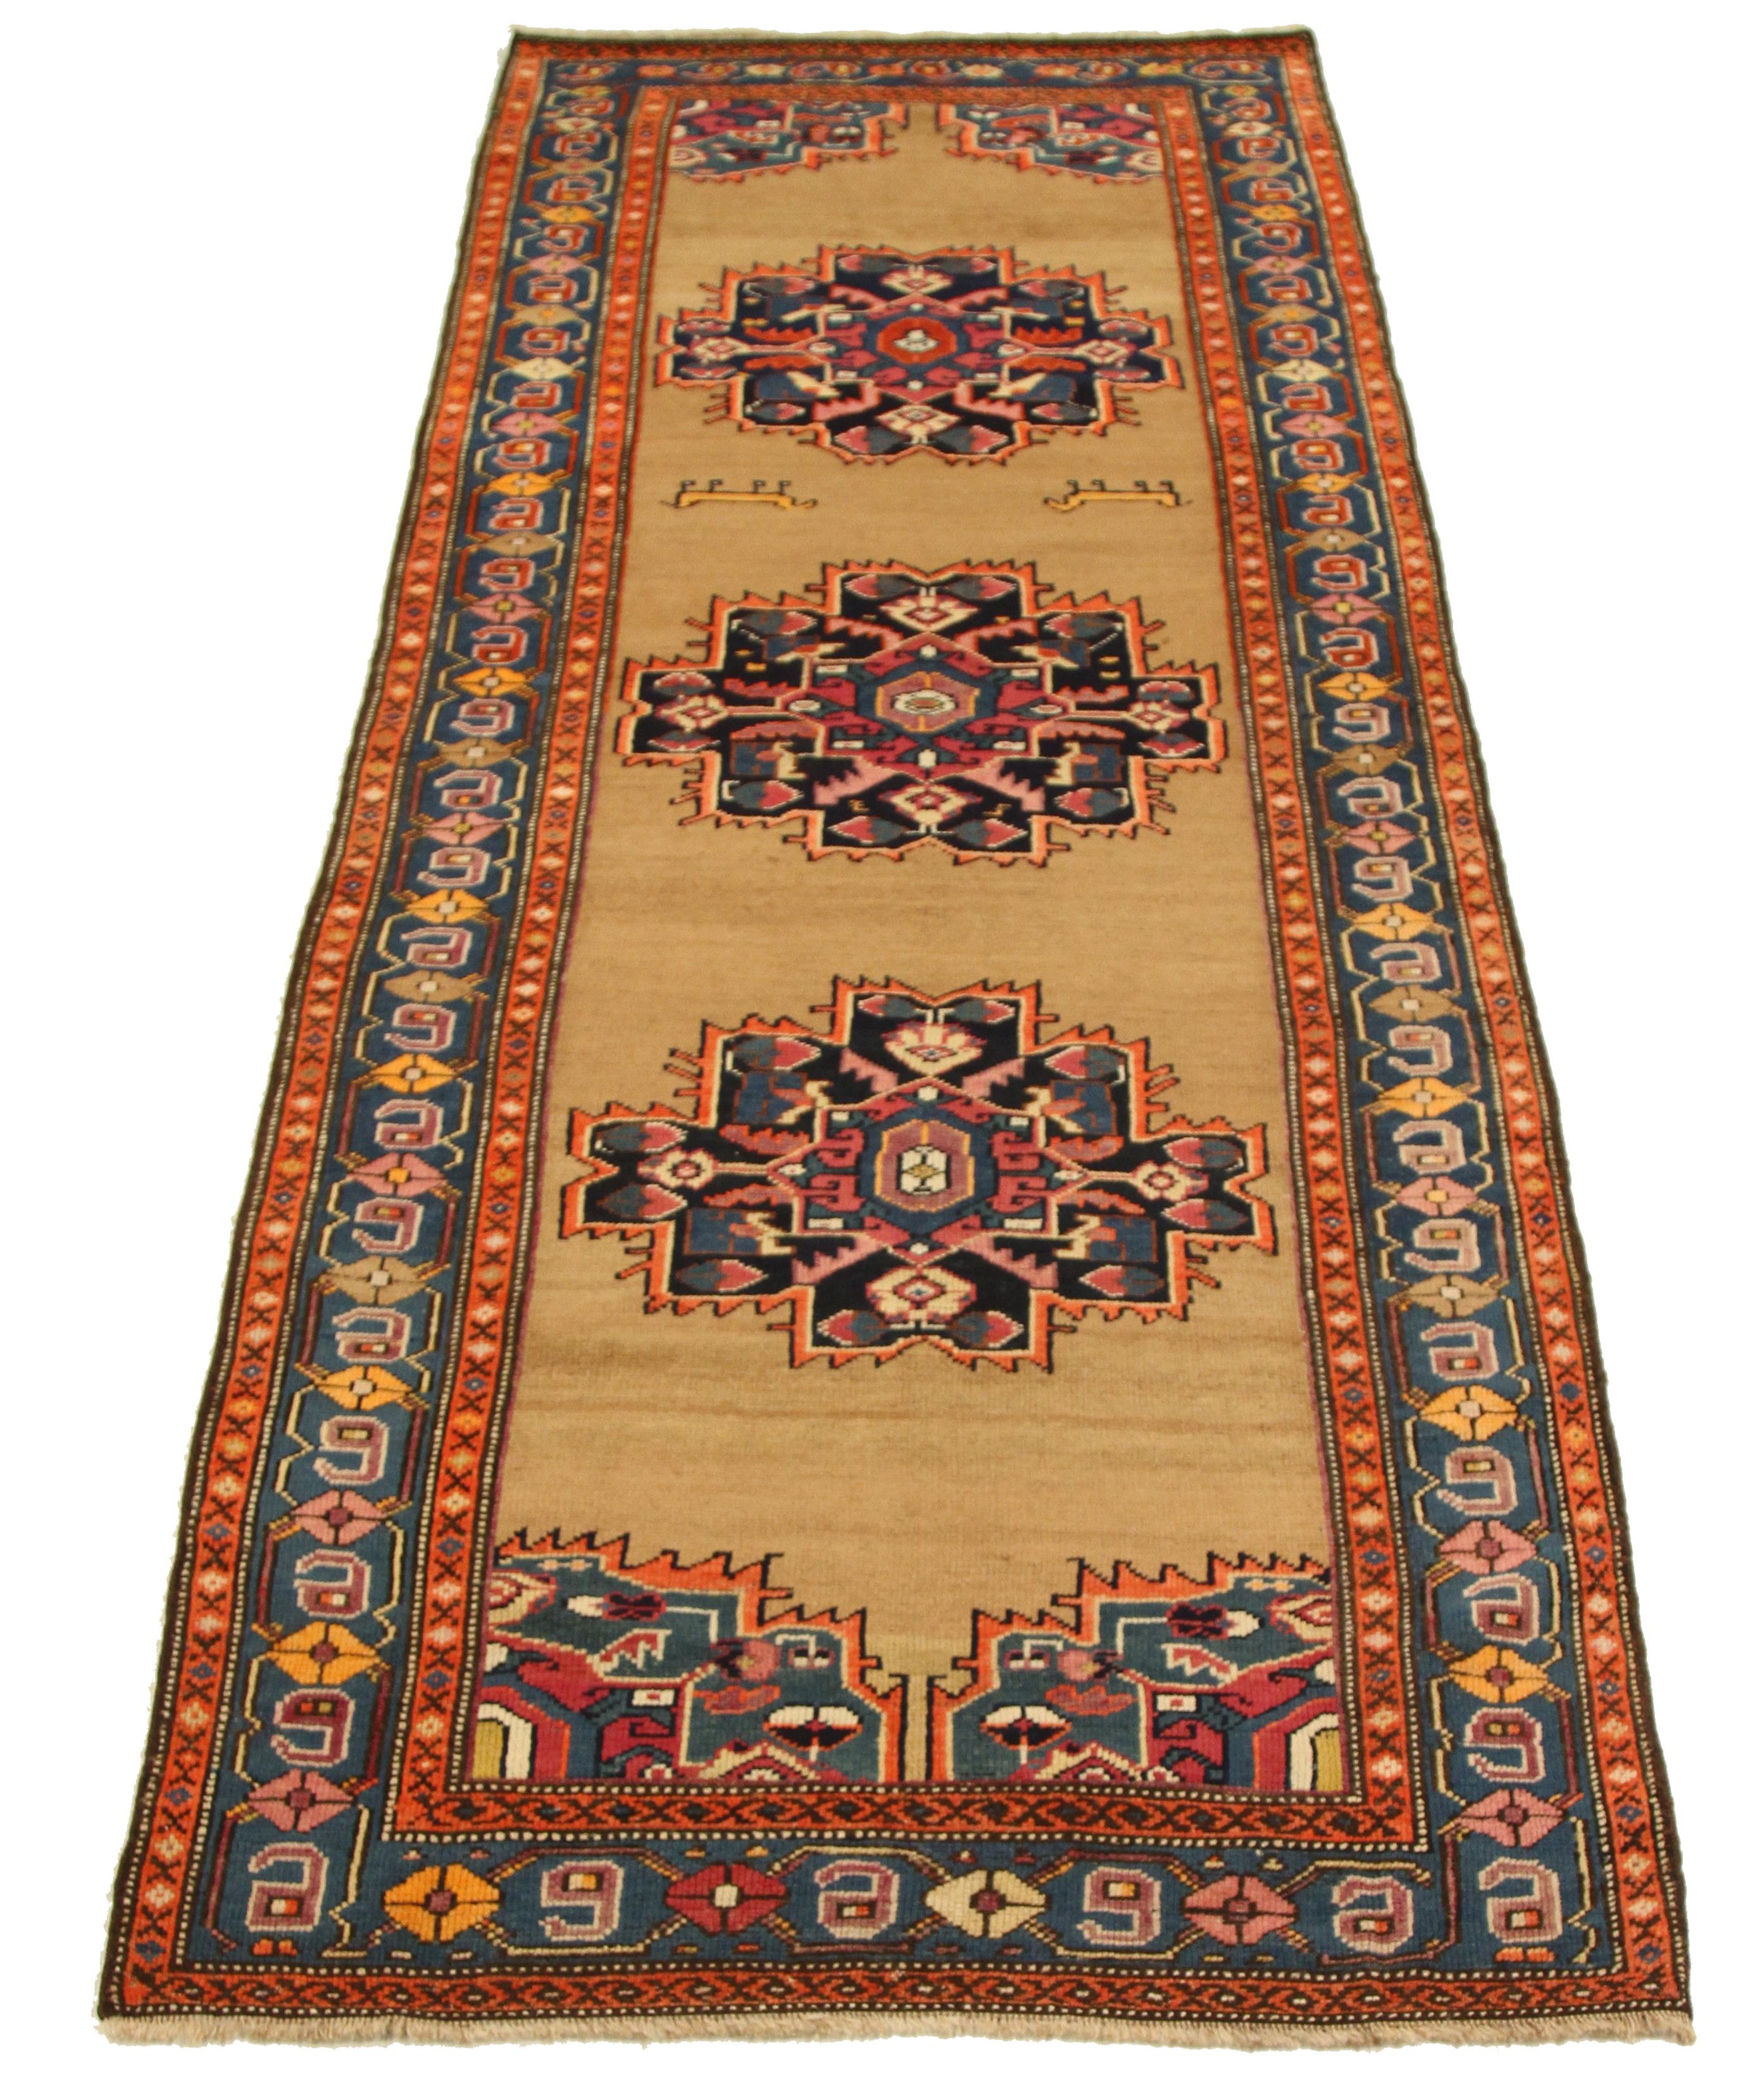 Antique handknotted Persian runner rug made from fine wool and all-natural vegetable dyes that are safe for people and pets. This beautiful piece features a rich field of floral details in various colors which is the traditional weaving design of